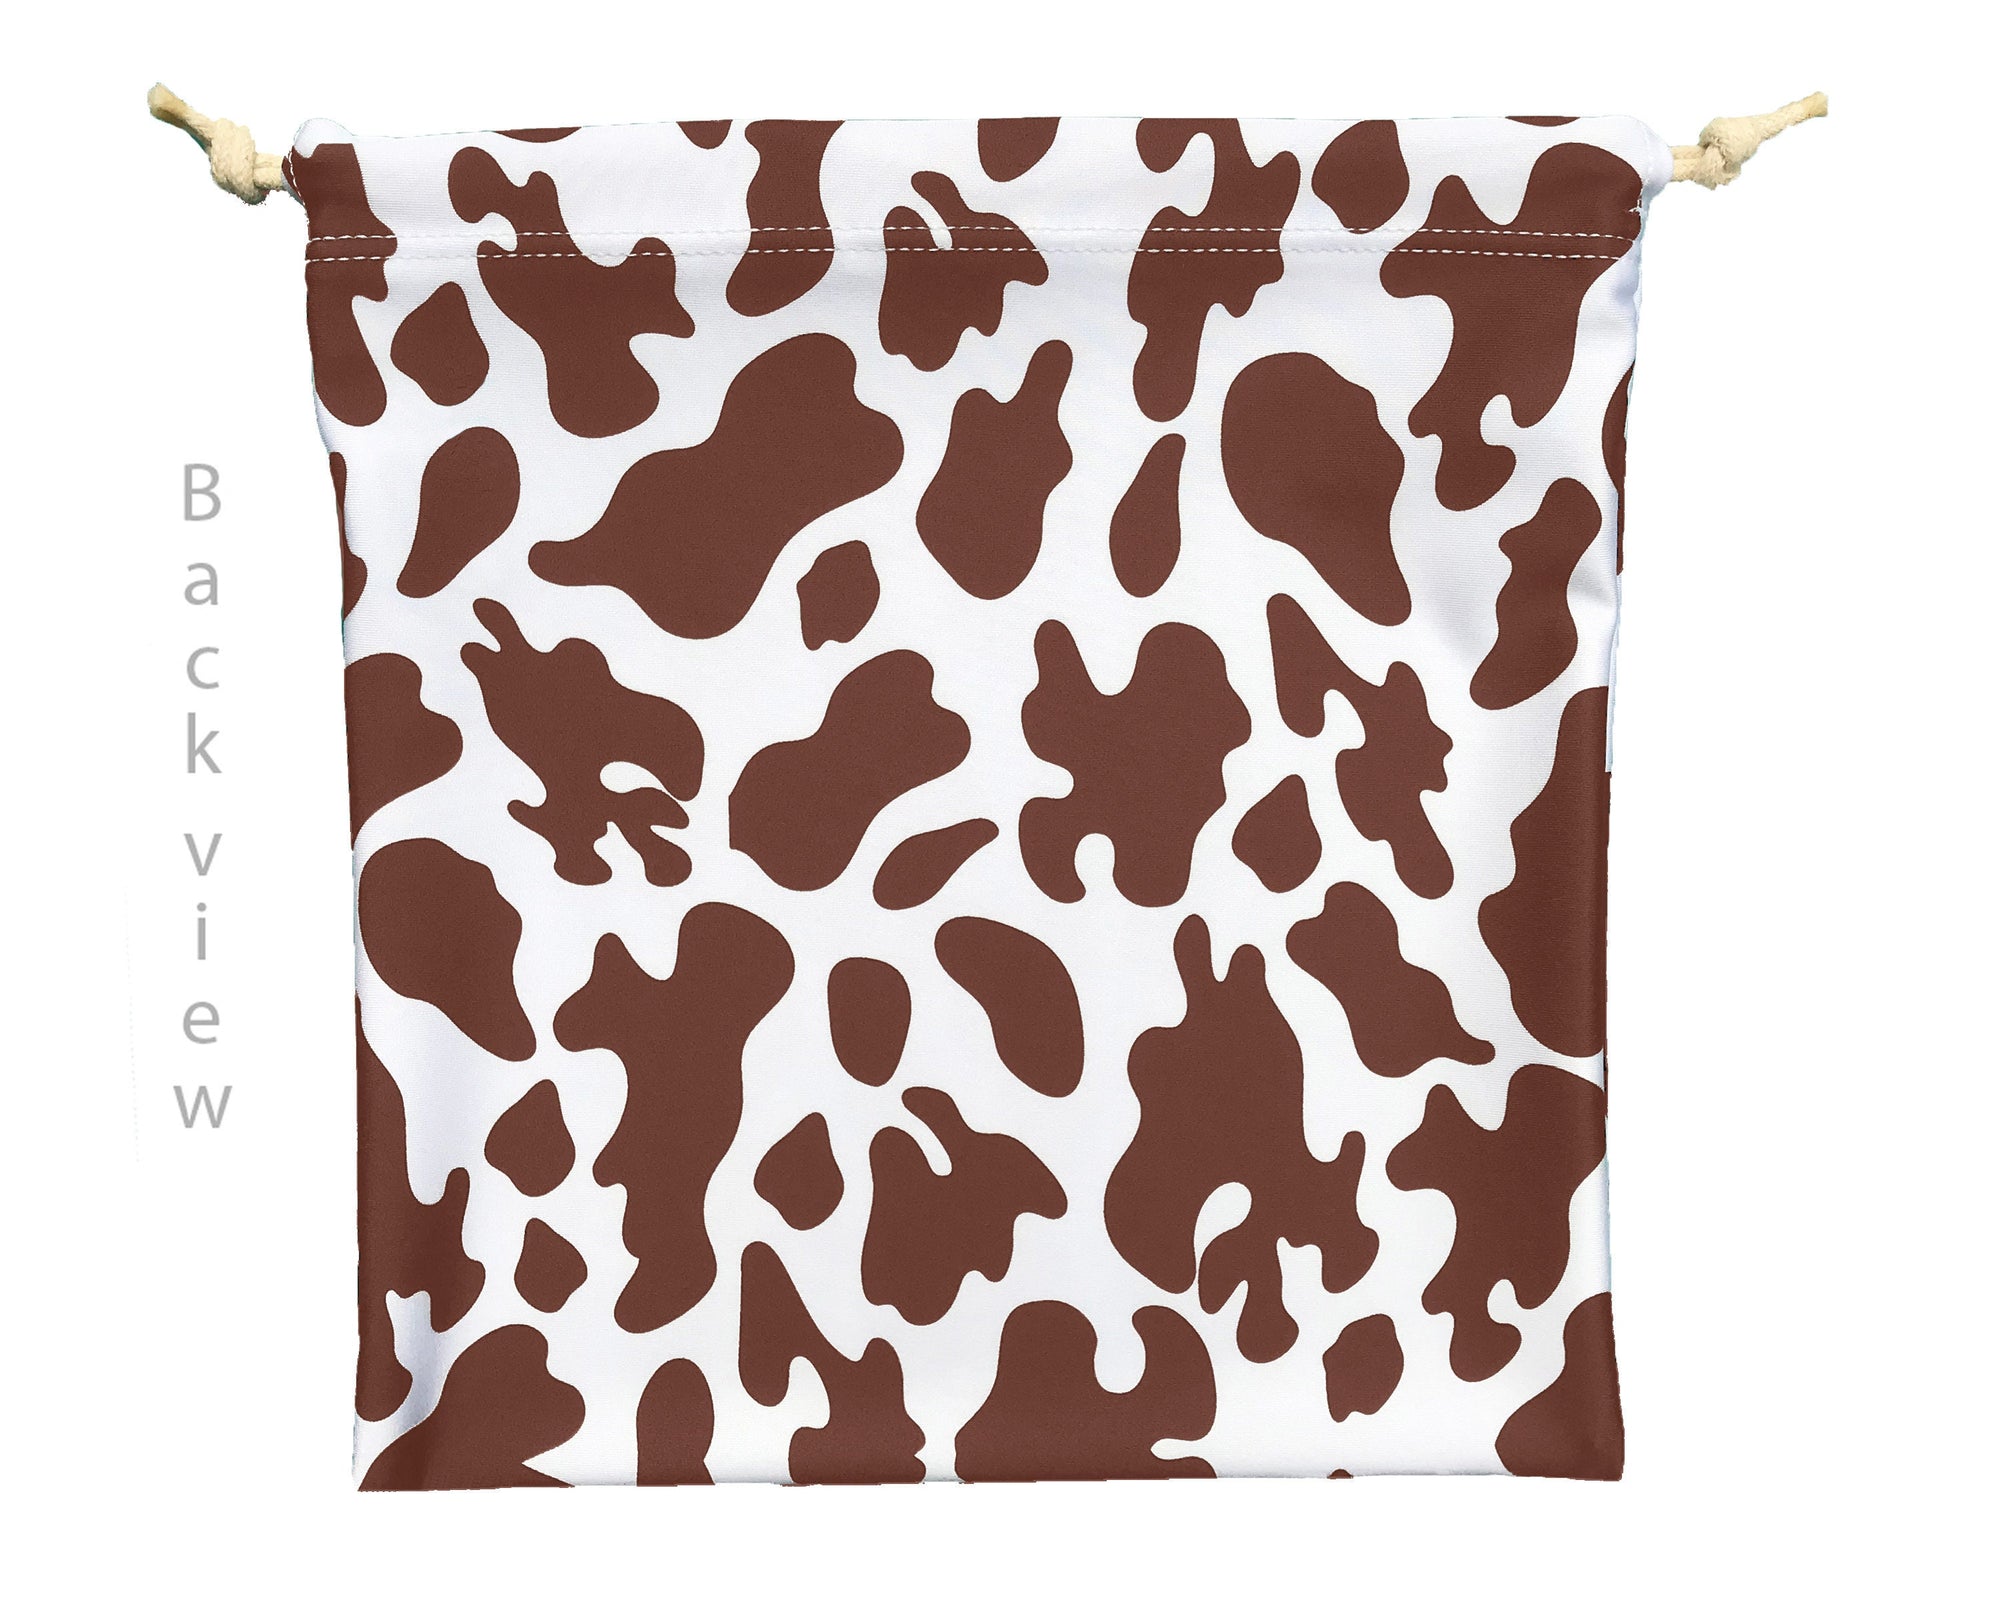 Personalized Gymnastics Grip Bag in Brown & White Cow Print